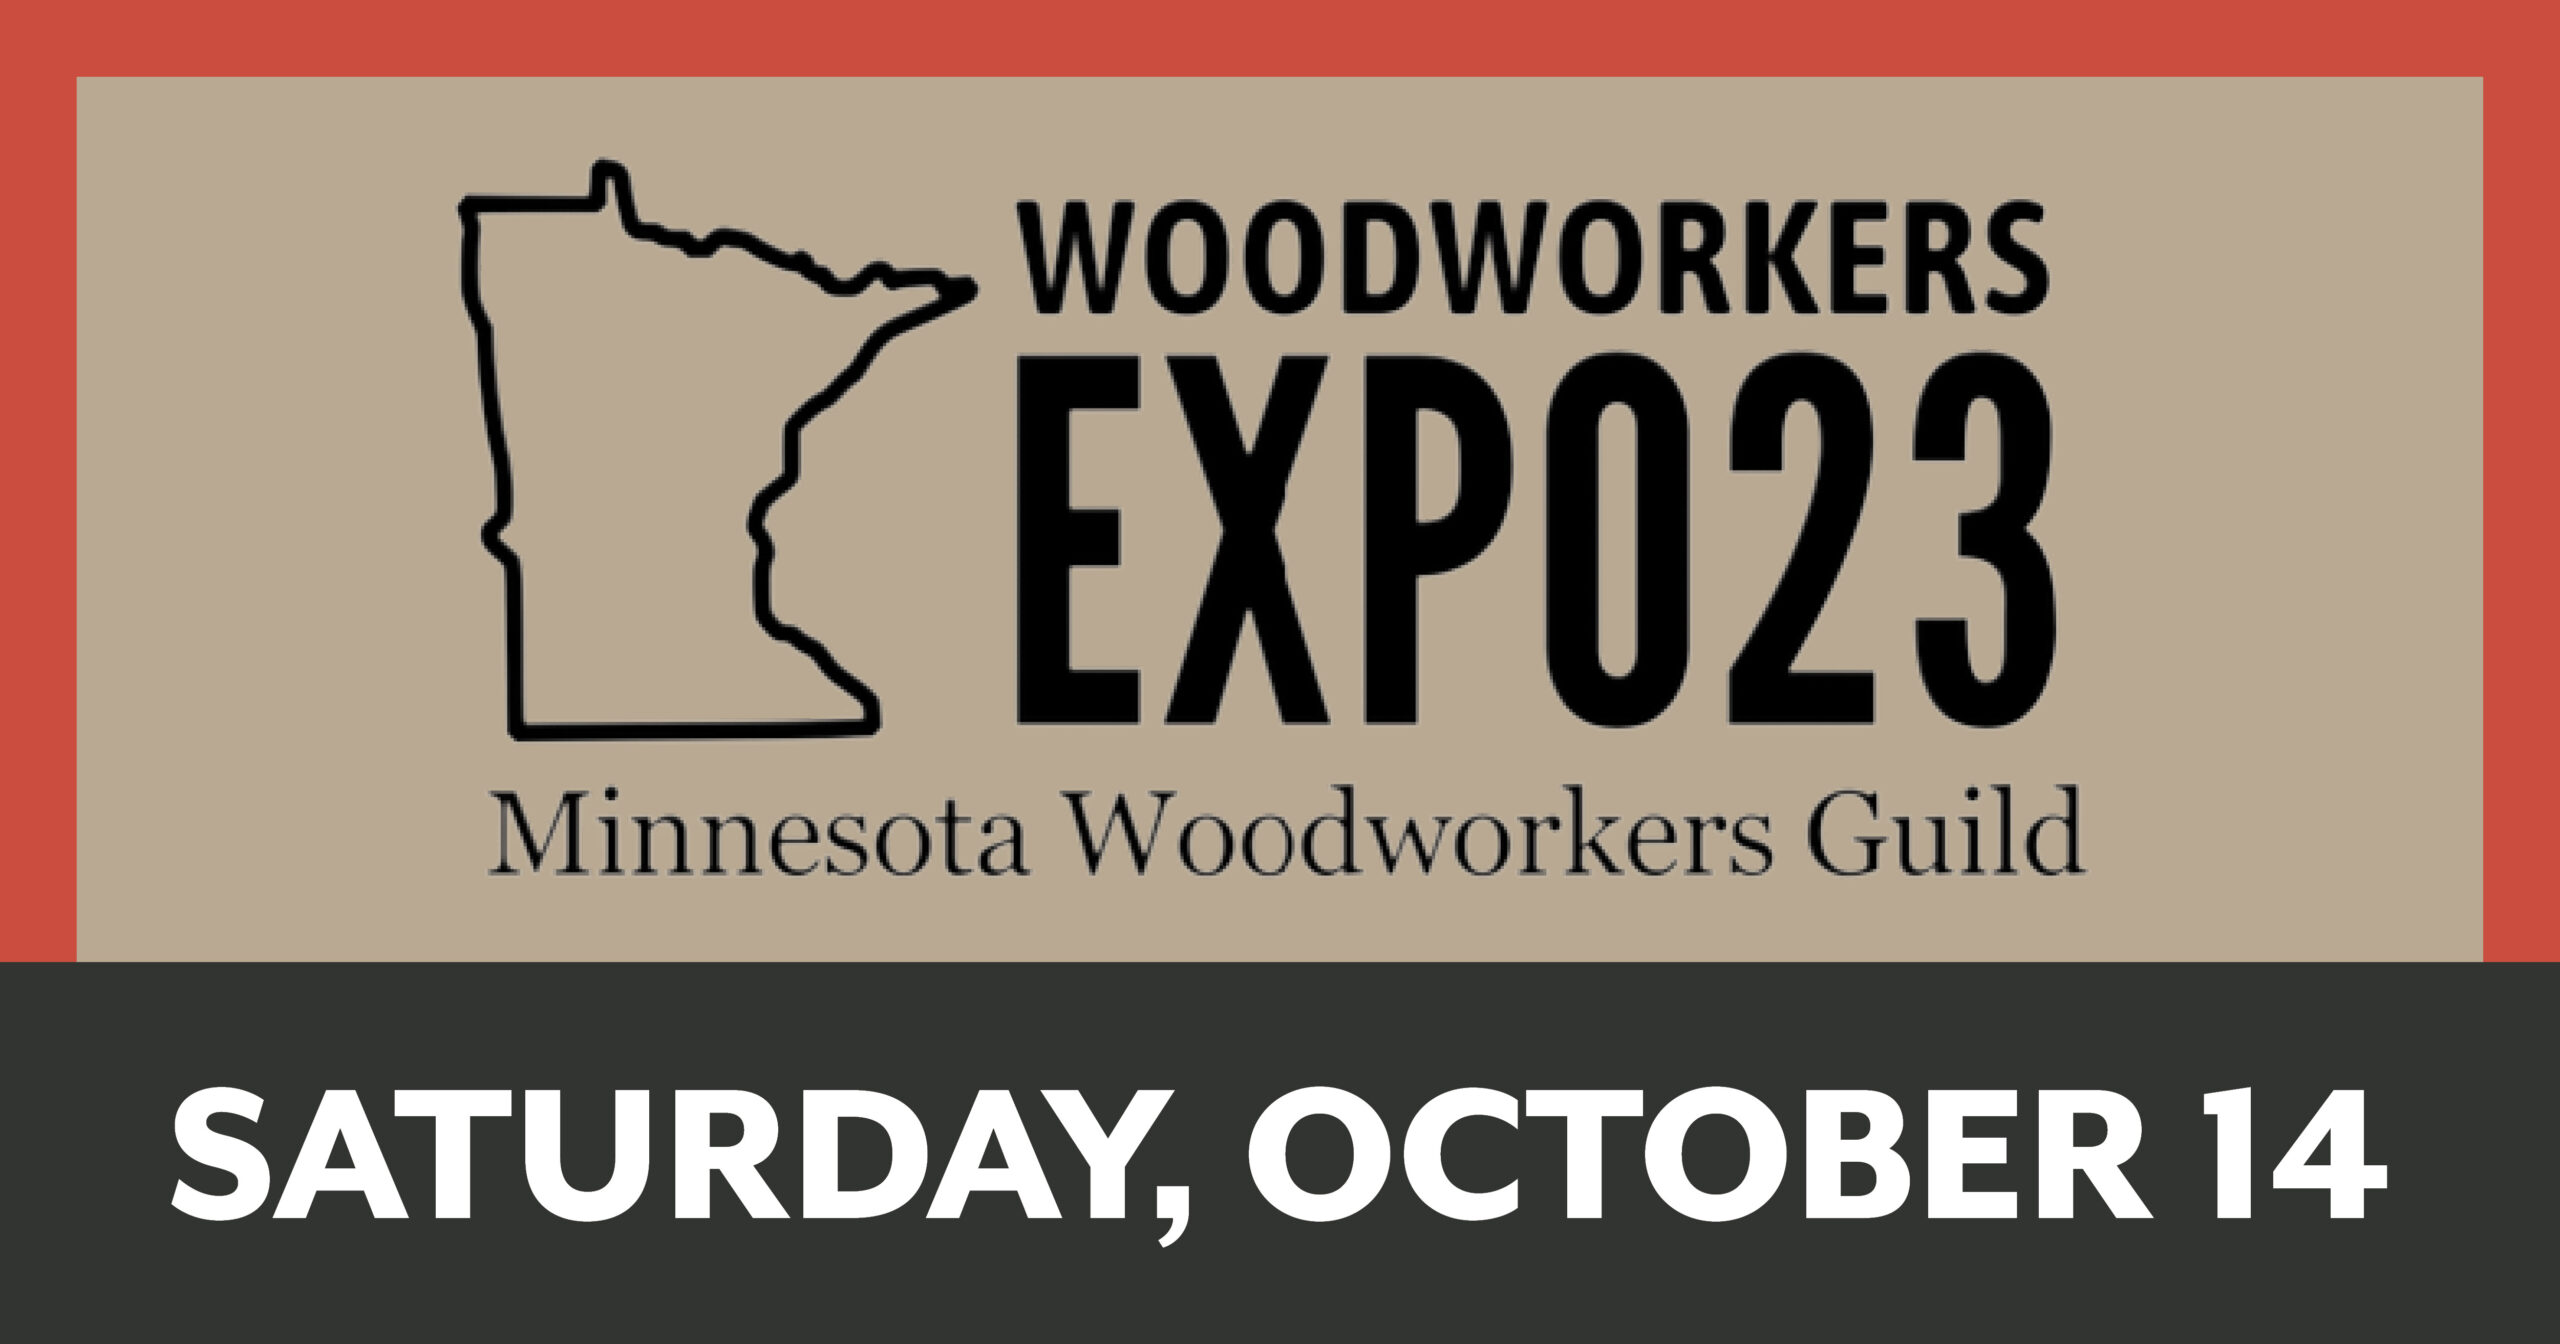 Woodworkers' Expo 2023